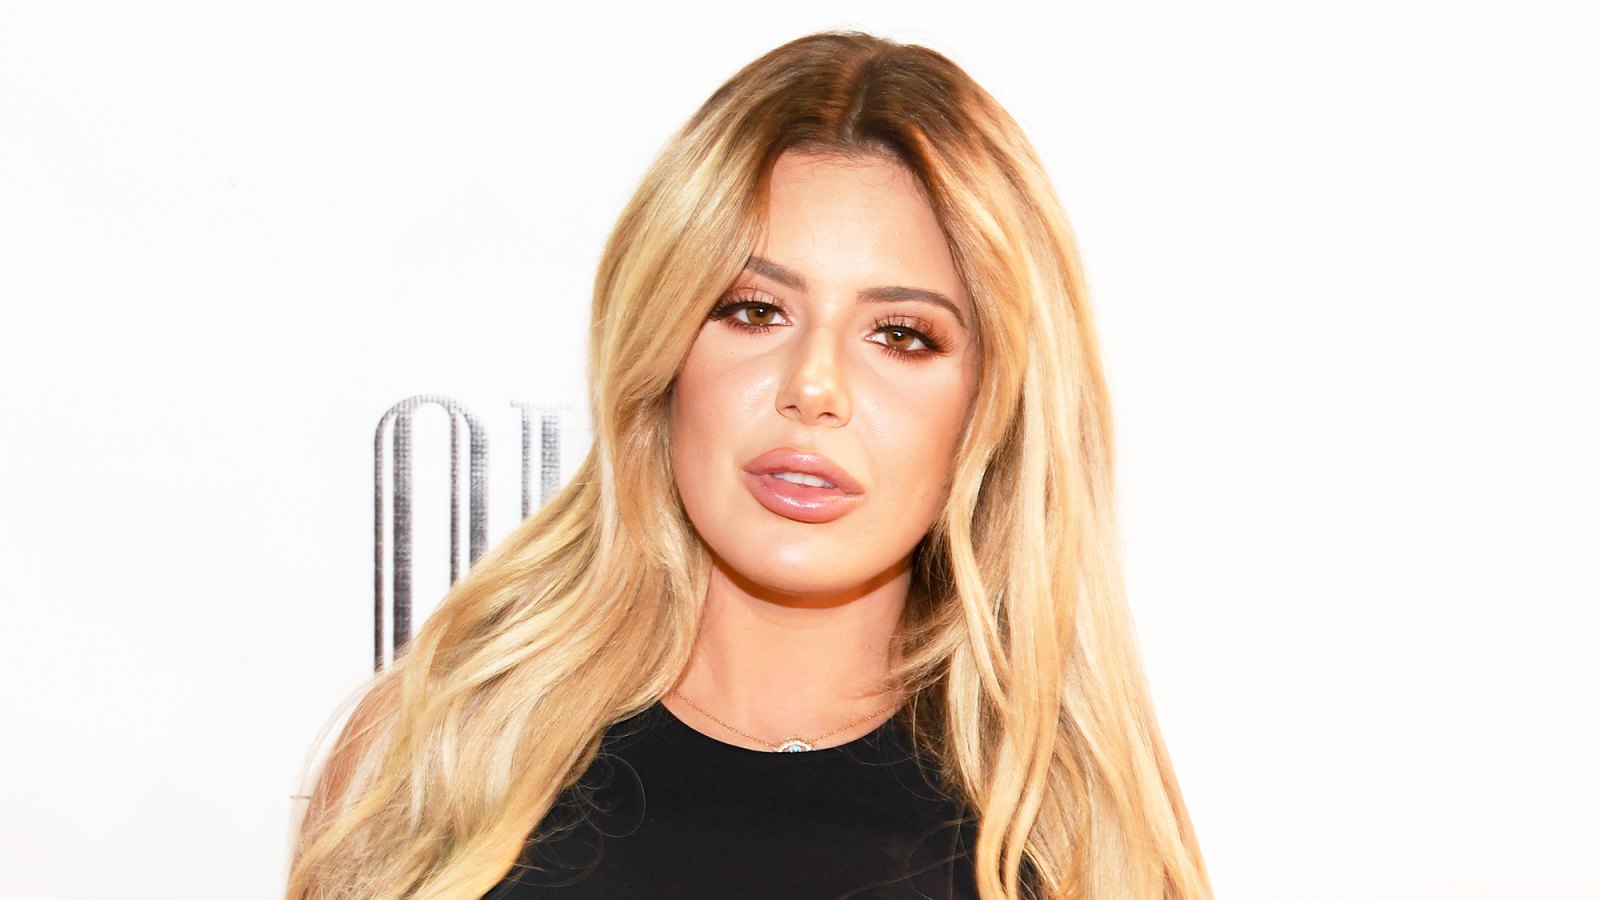 Brielle Biermann's Car Robbed: Chanel Purse and Credit Cards Taken